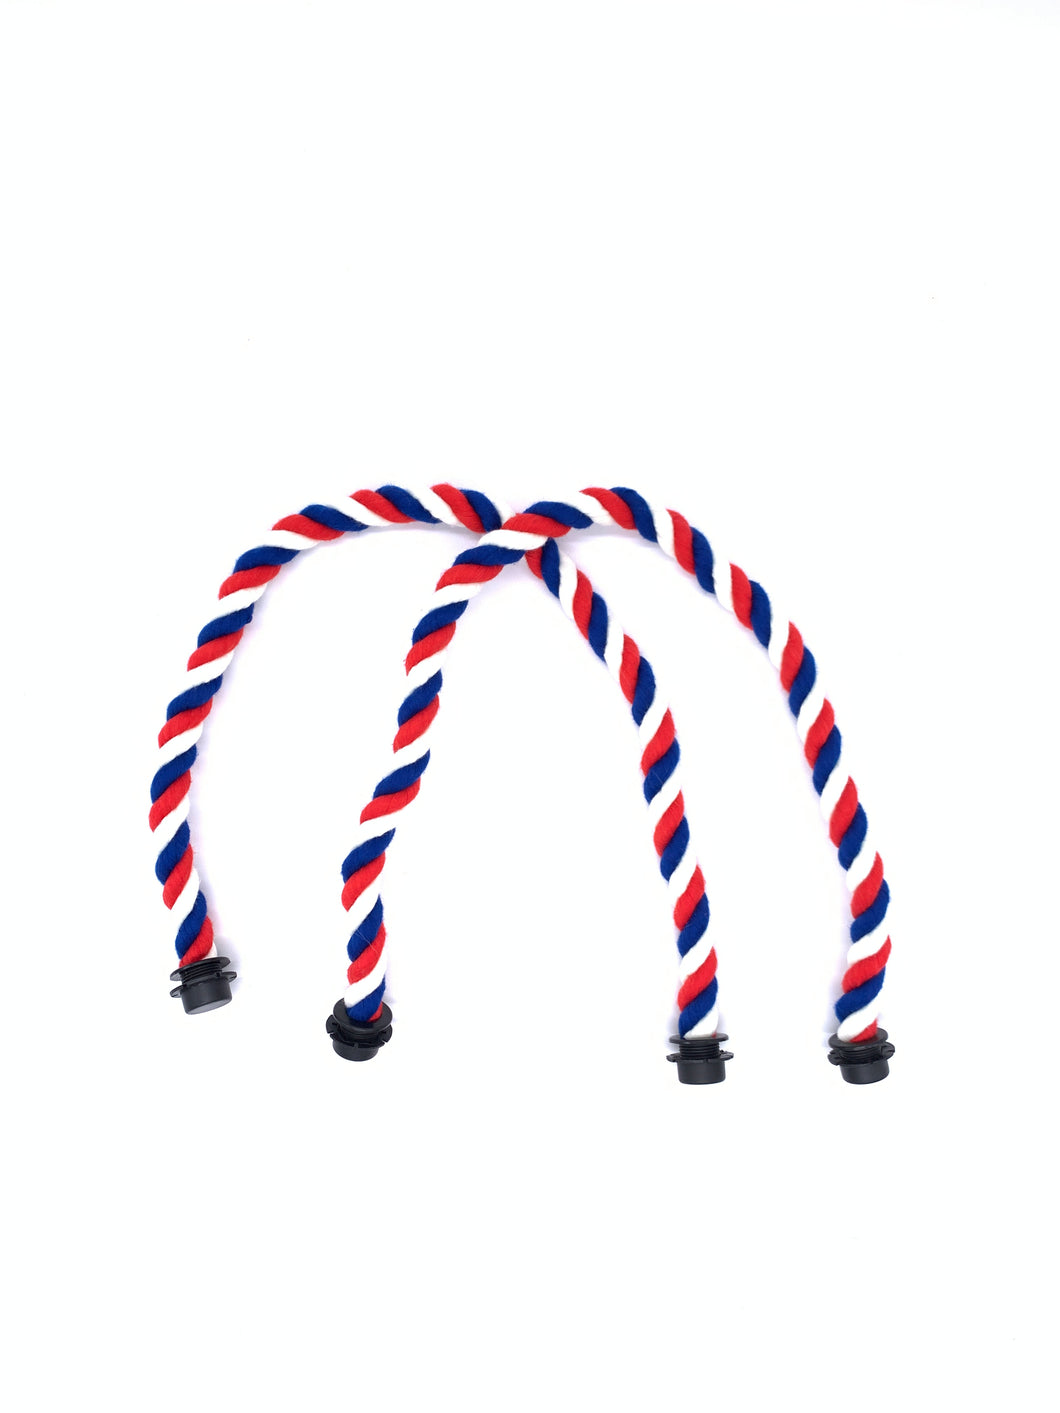 Be Me Bag Handles - Red, White, Blue Ropes